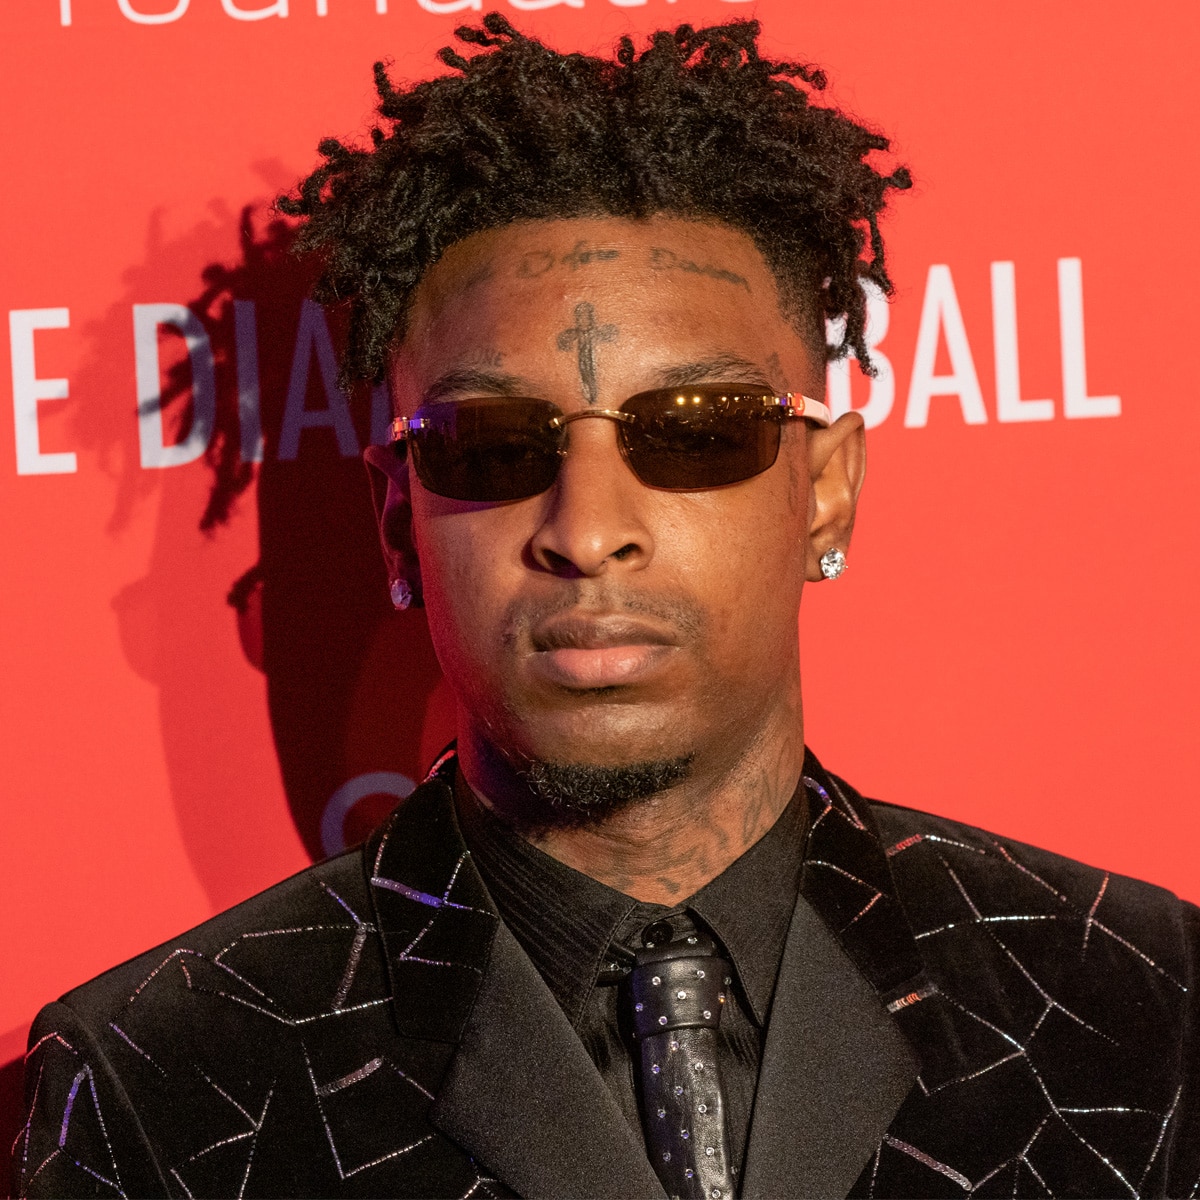 rapper 21 savage attends red carpet at diamond ball event